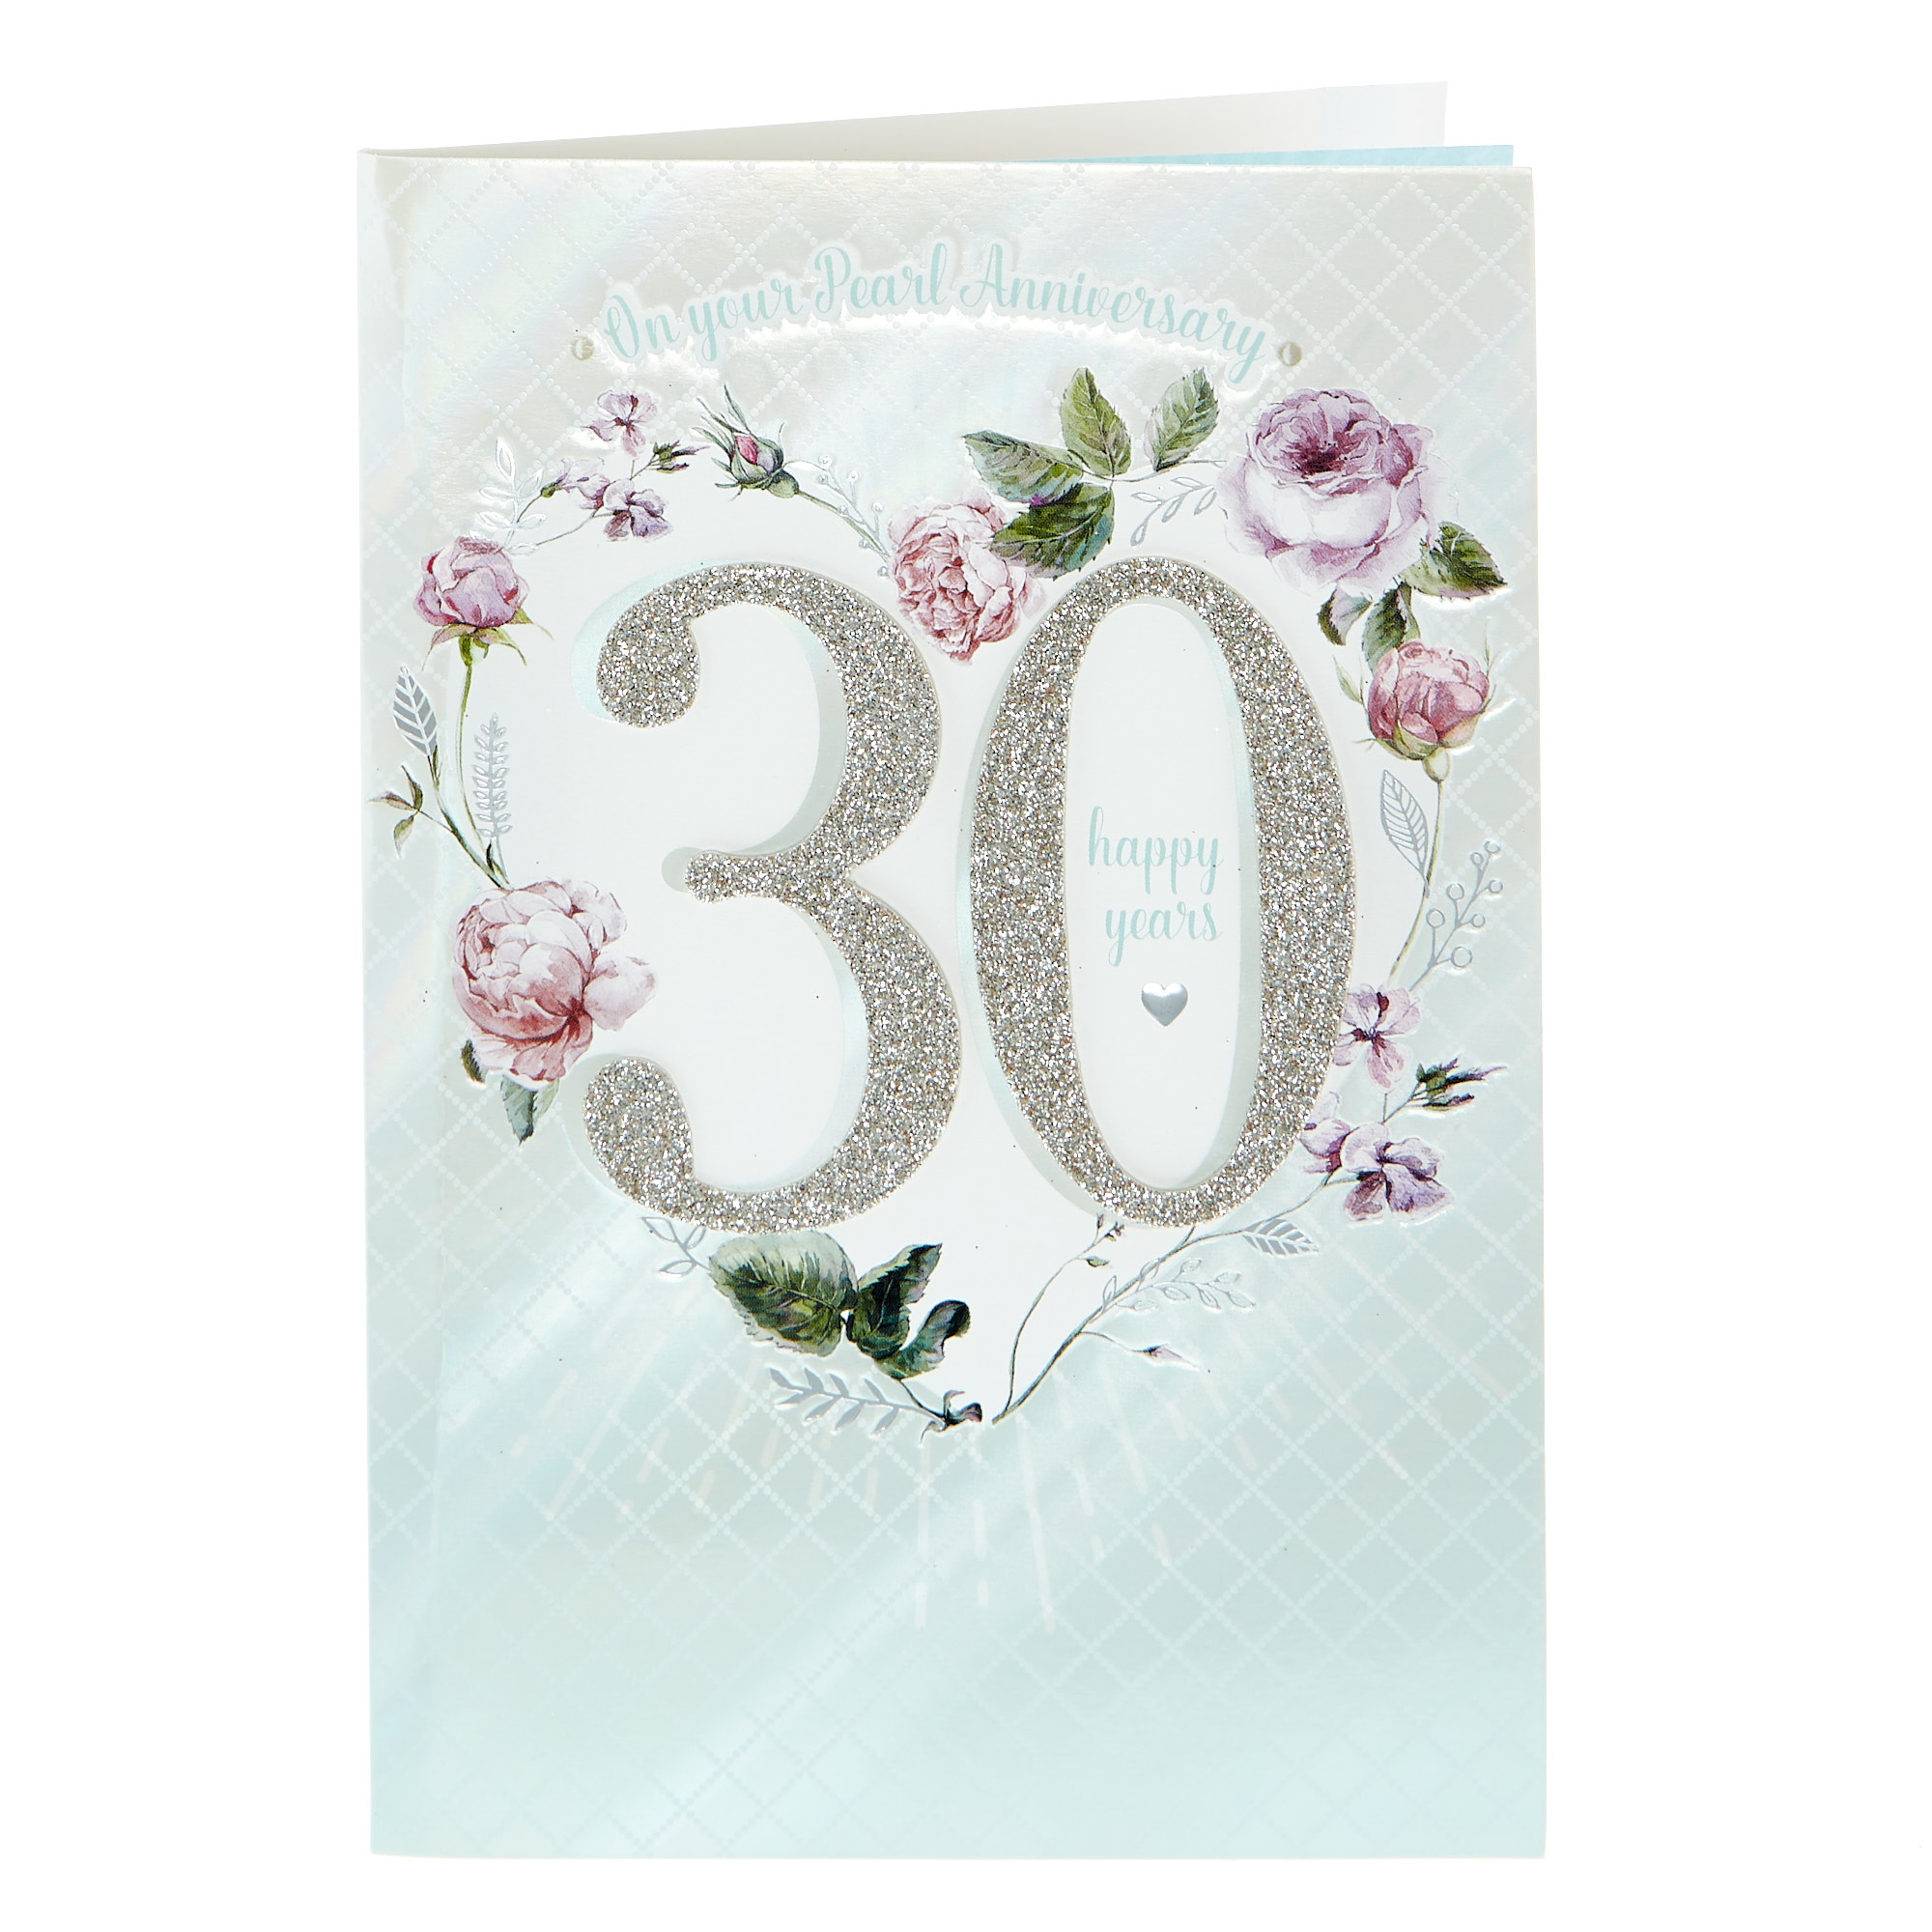 30th Anniversary Card - On Your Pearl Anniversary 